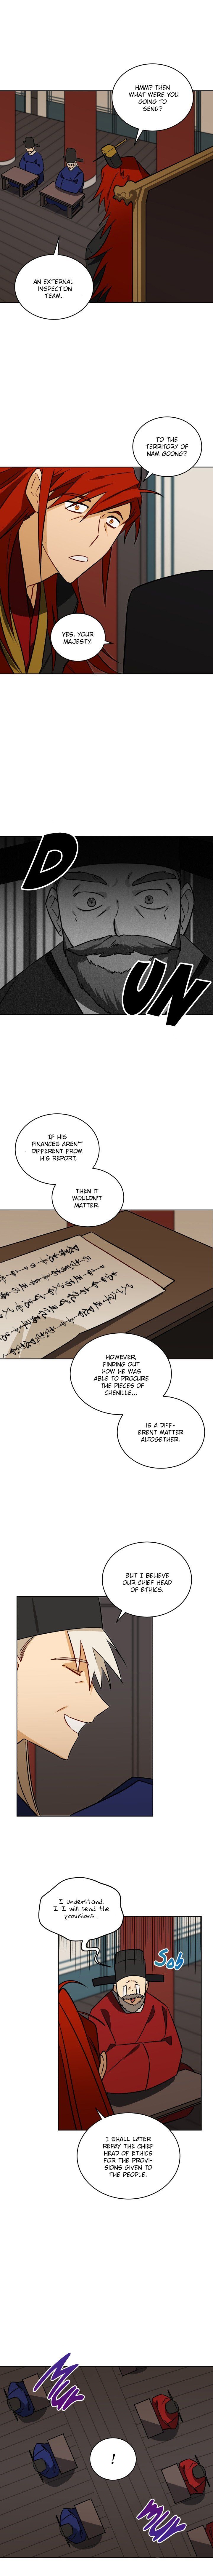 Beast with Flowers Chapter 49 page 6